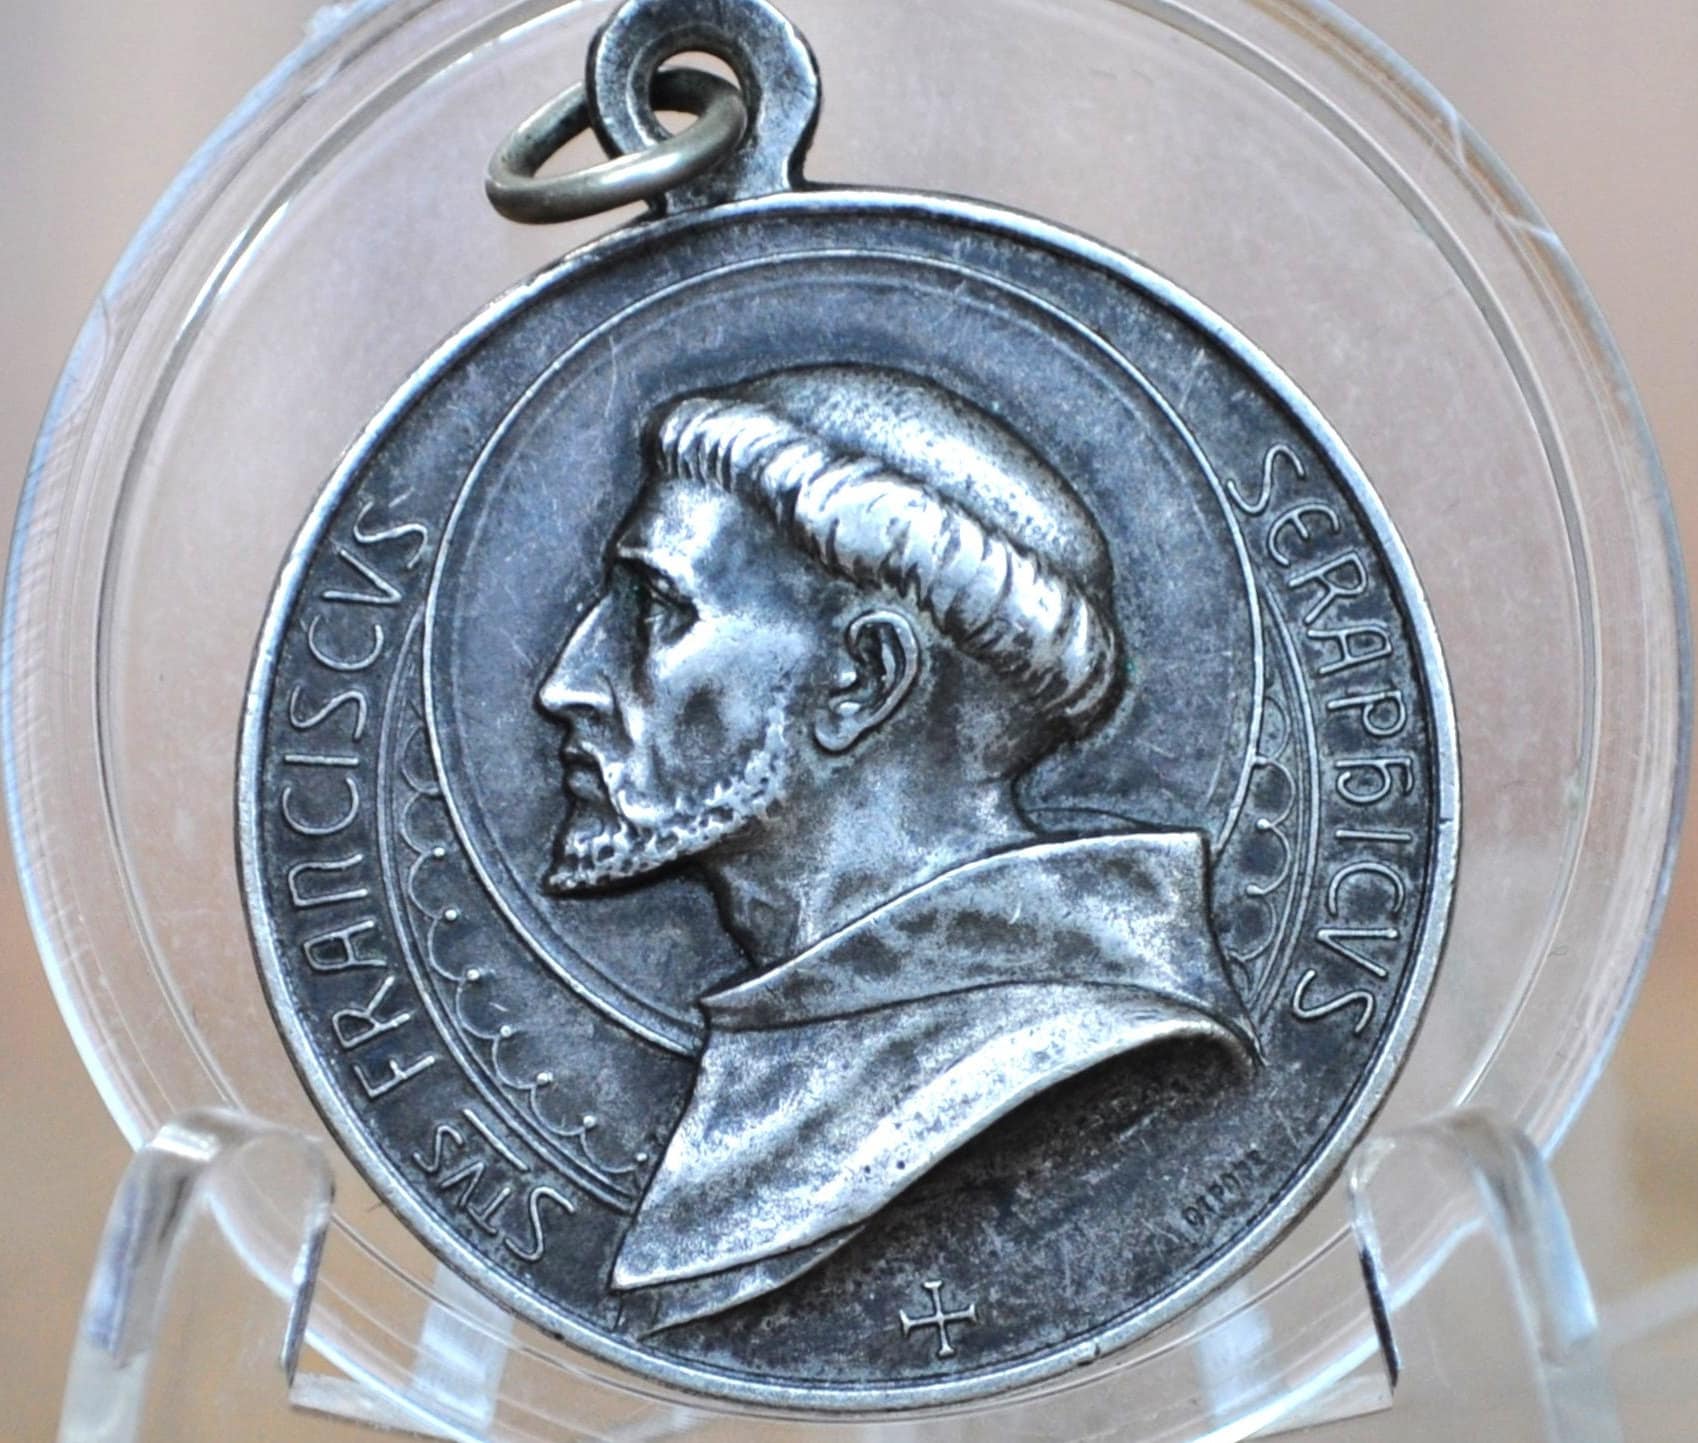 Beautiful 1926 Sterling Saint Francis of Assisi Medal - Vintage Catholic Medallion - Francesco d'Assisi, Psalm 141, Silver Religious Pendent